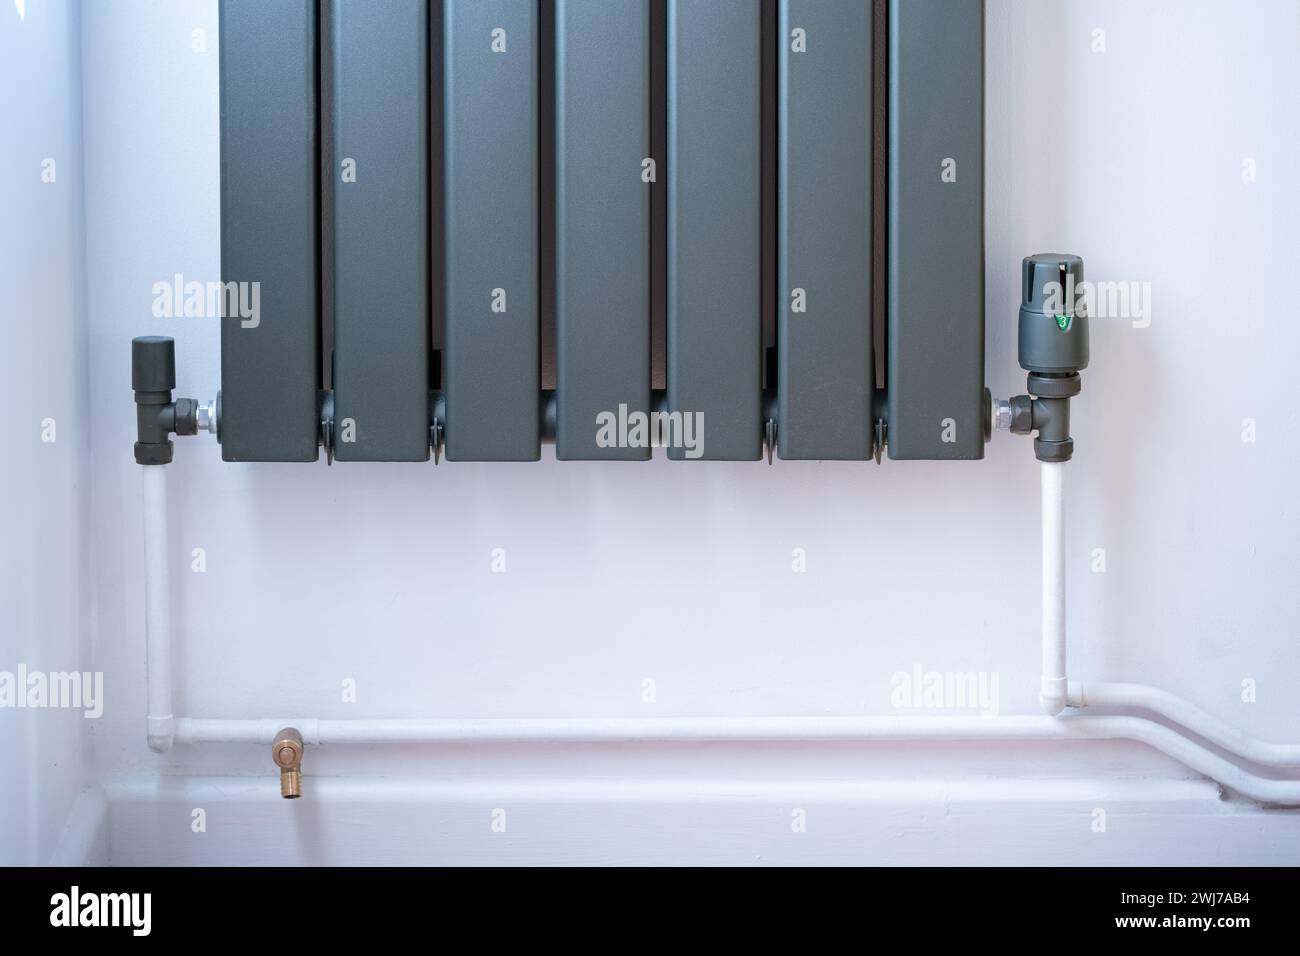 A modern domestic upright radiator fitted with thermostatic angled radiator valves allowing accurate home heating control for central heating systems Stock Photo